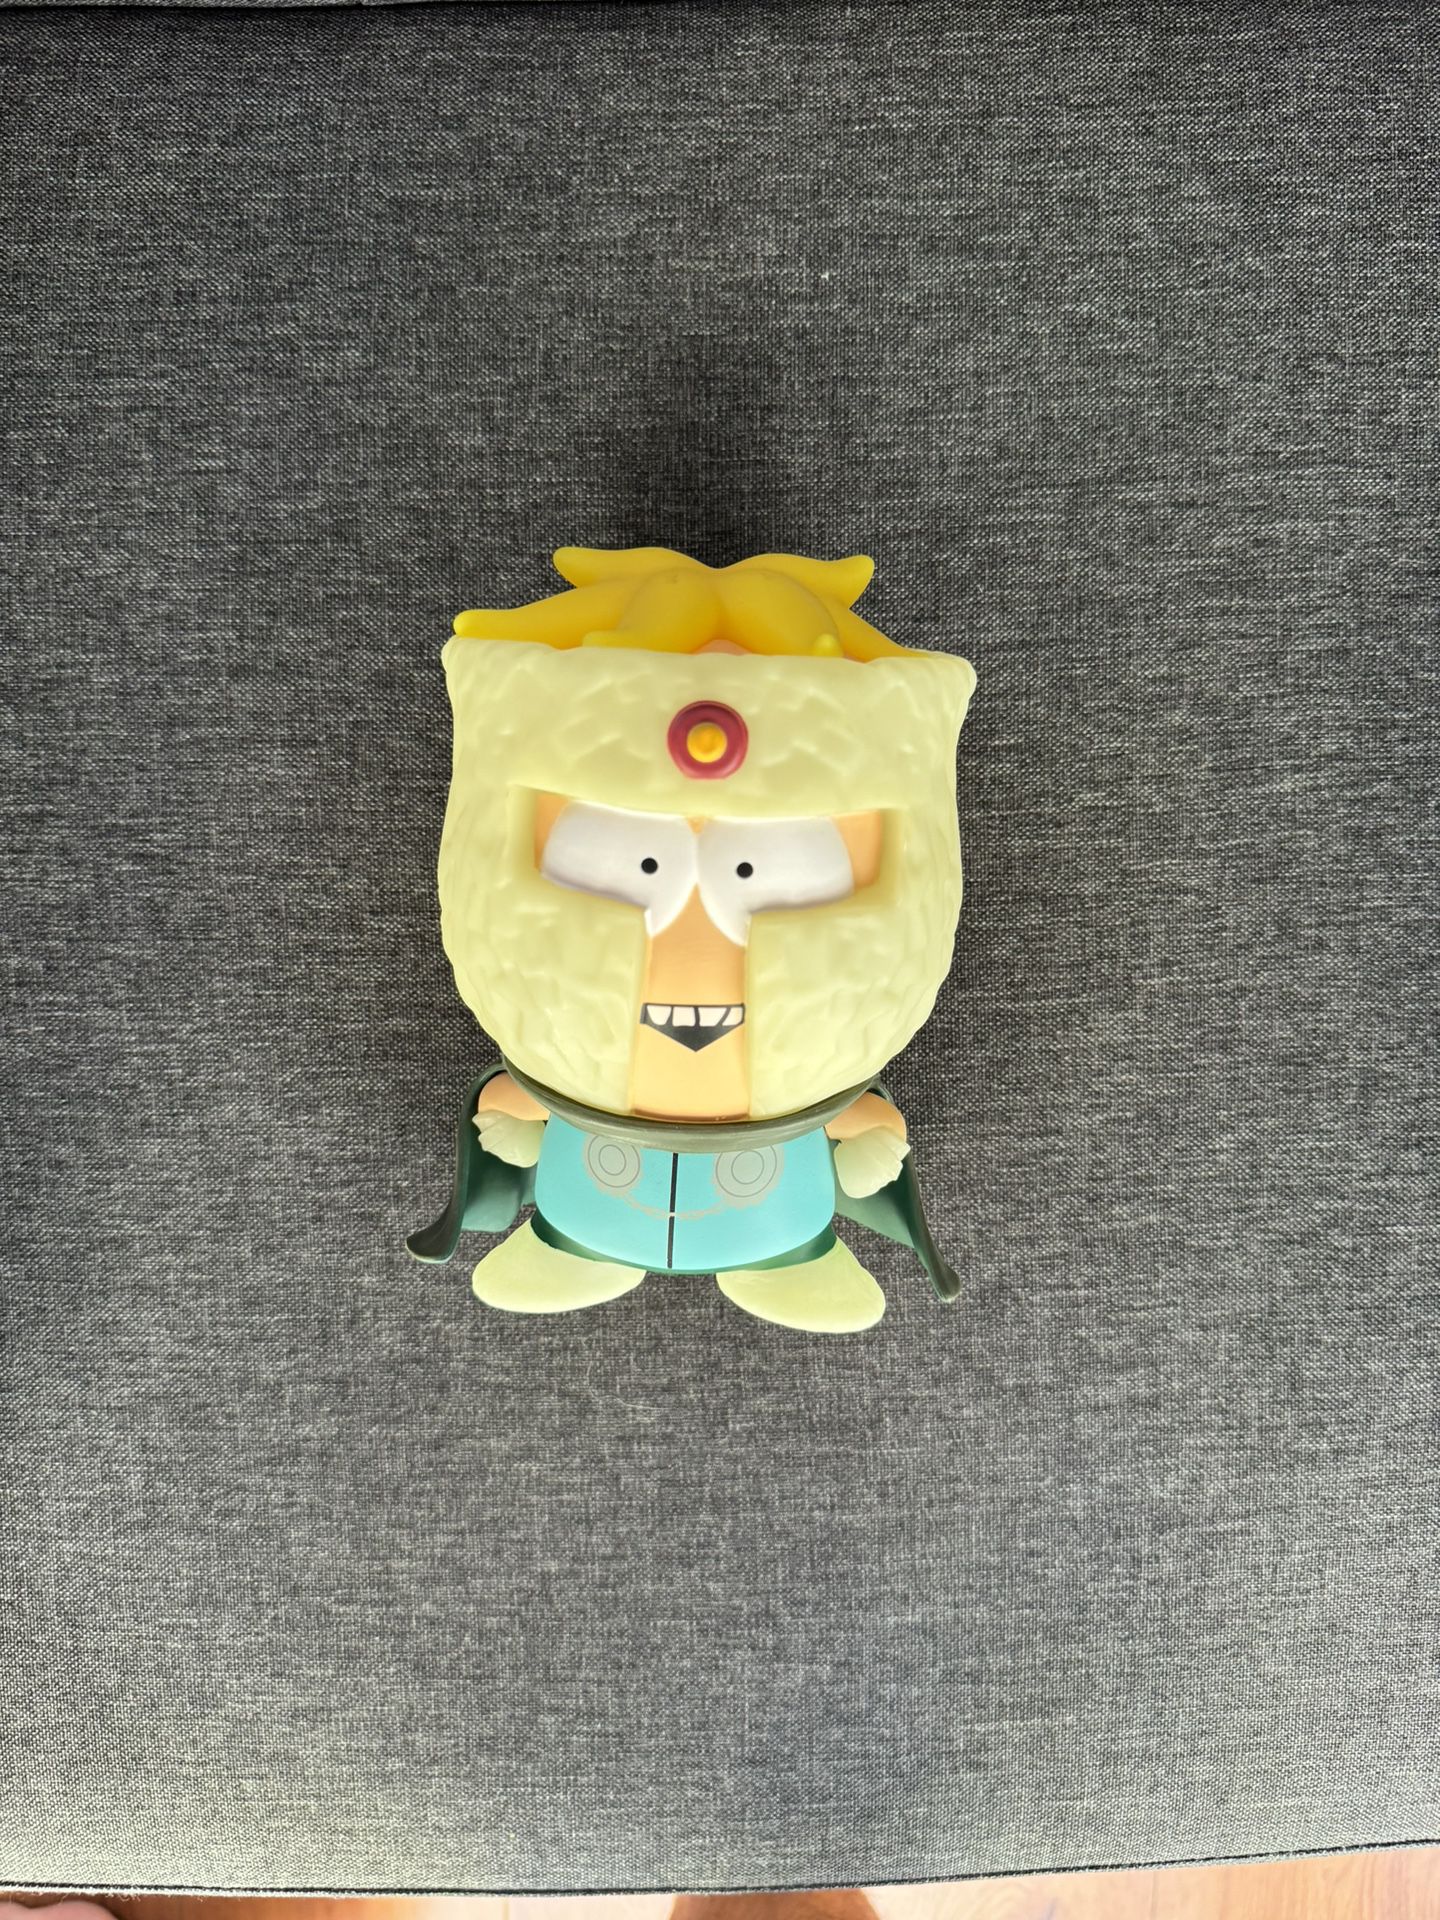 Glow in the Dark Professor Chaos (Butters) from South Park